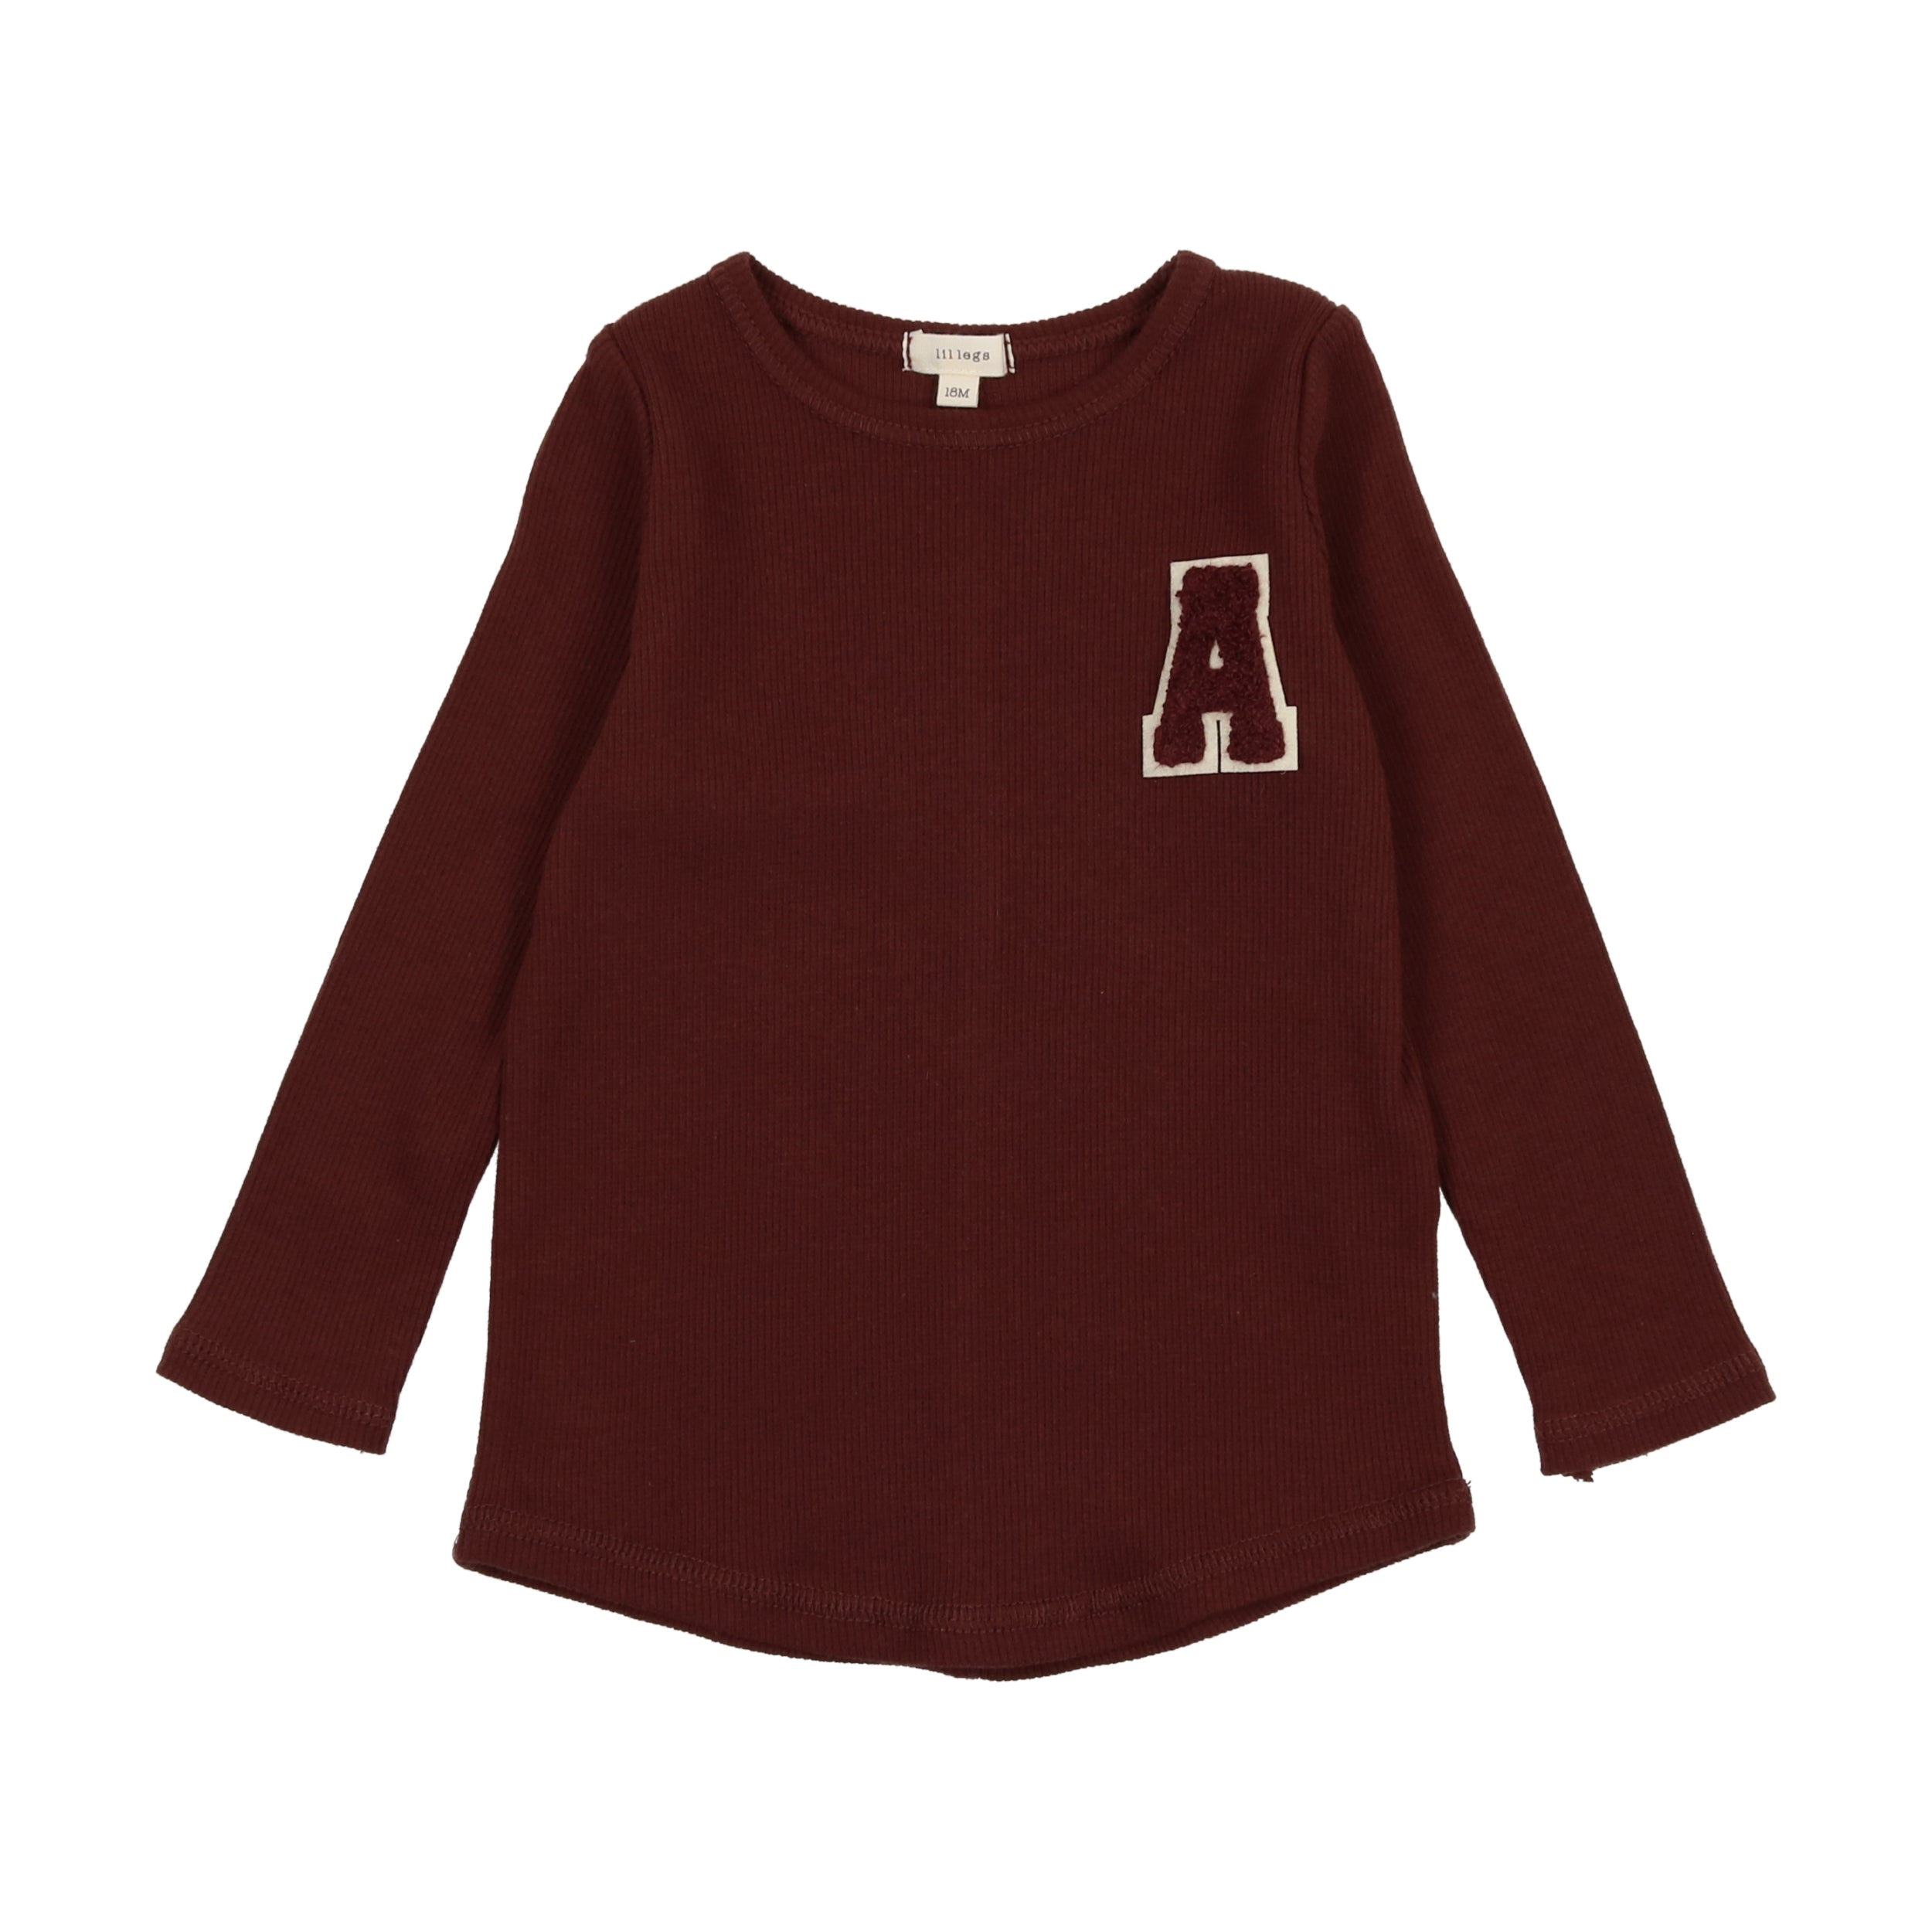 Burgundy Ribbed Applique Tee